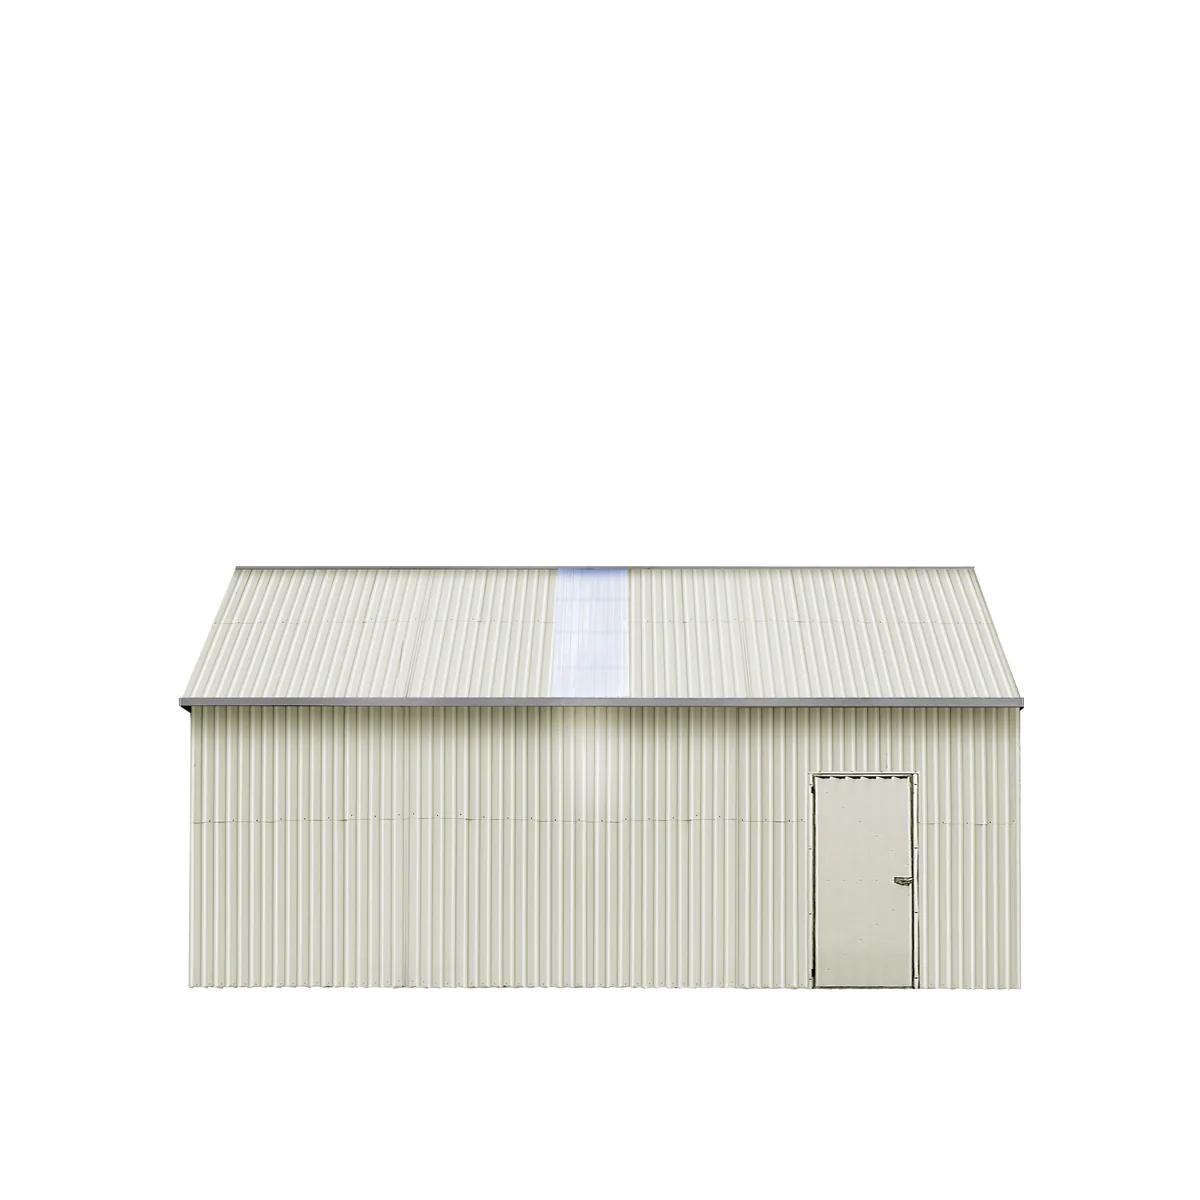 STORAGE BUILDING NEW TMG Industrial 25' x 25' Double Garage Metal Barn Shed with Side Entry Door,